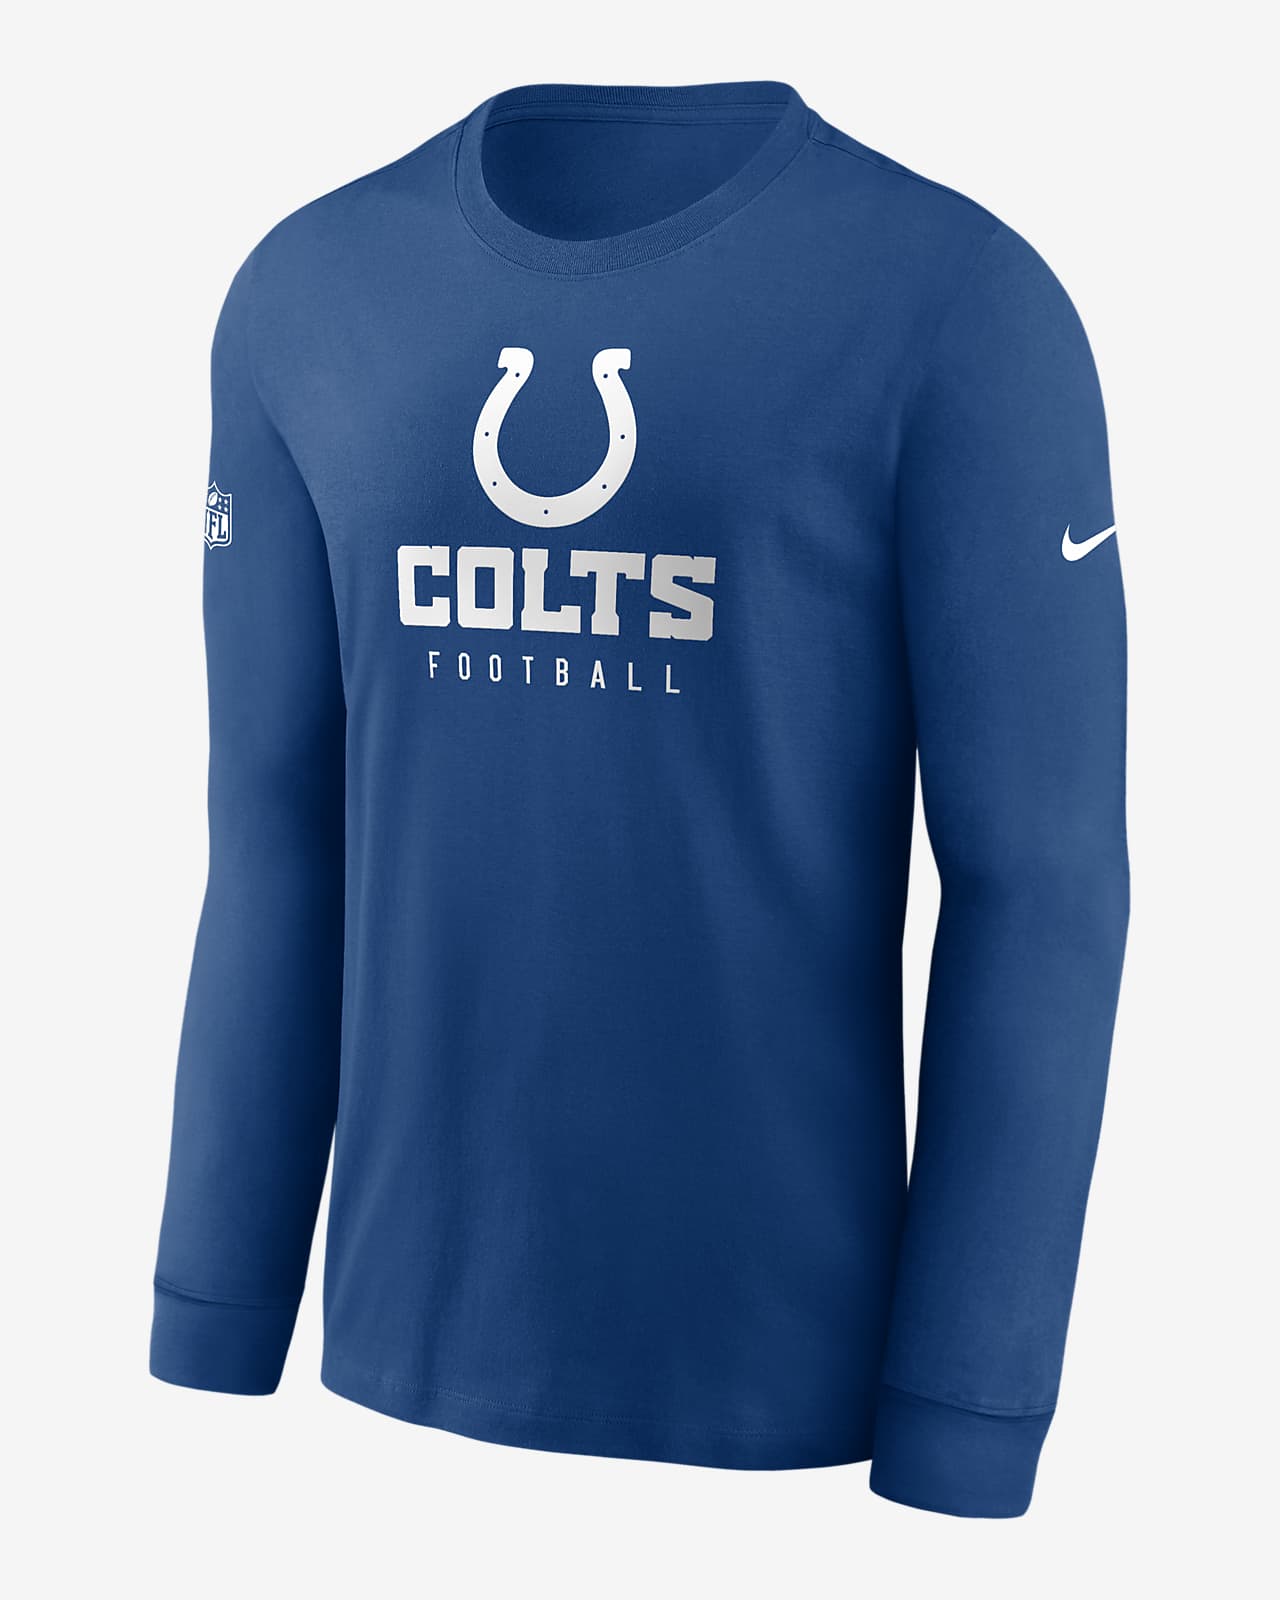 indianapolis colts gear cheap